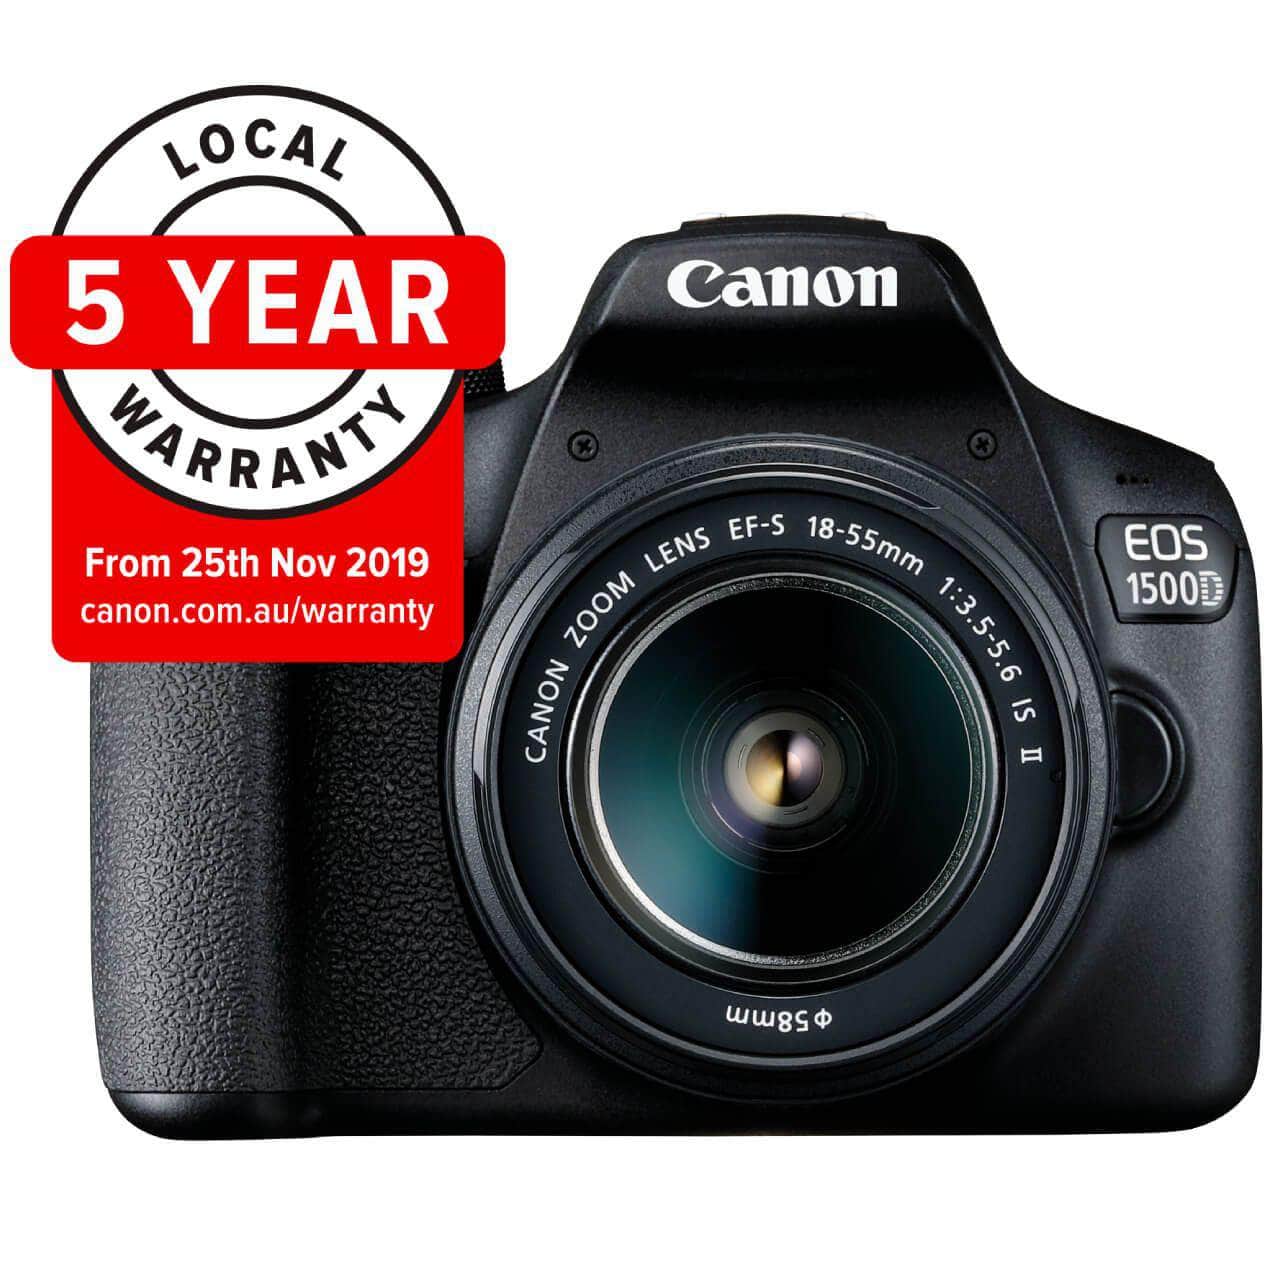 Canon EOS 1500D DSLR Camera with EFS 18-55mm III Lens Kit